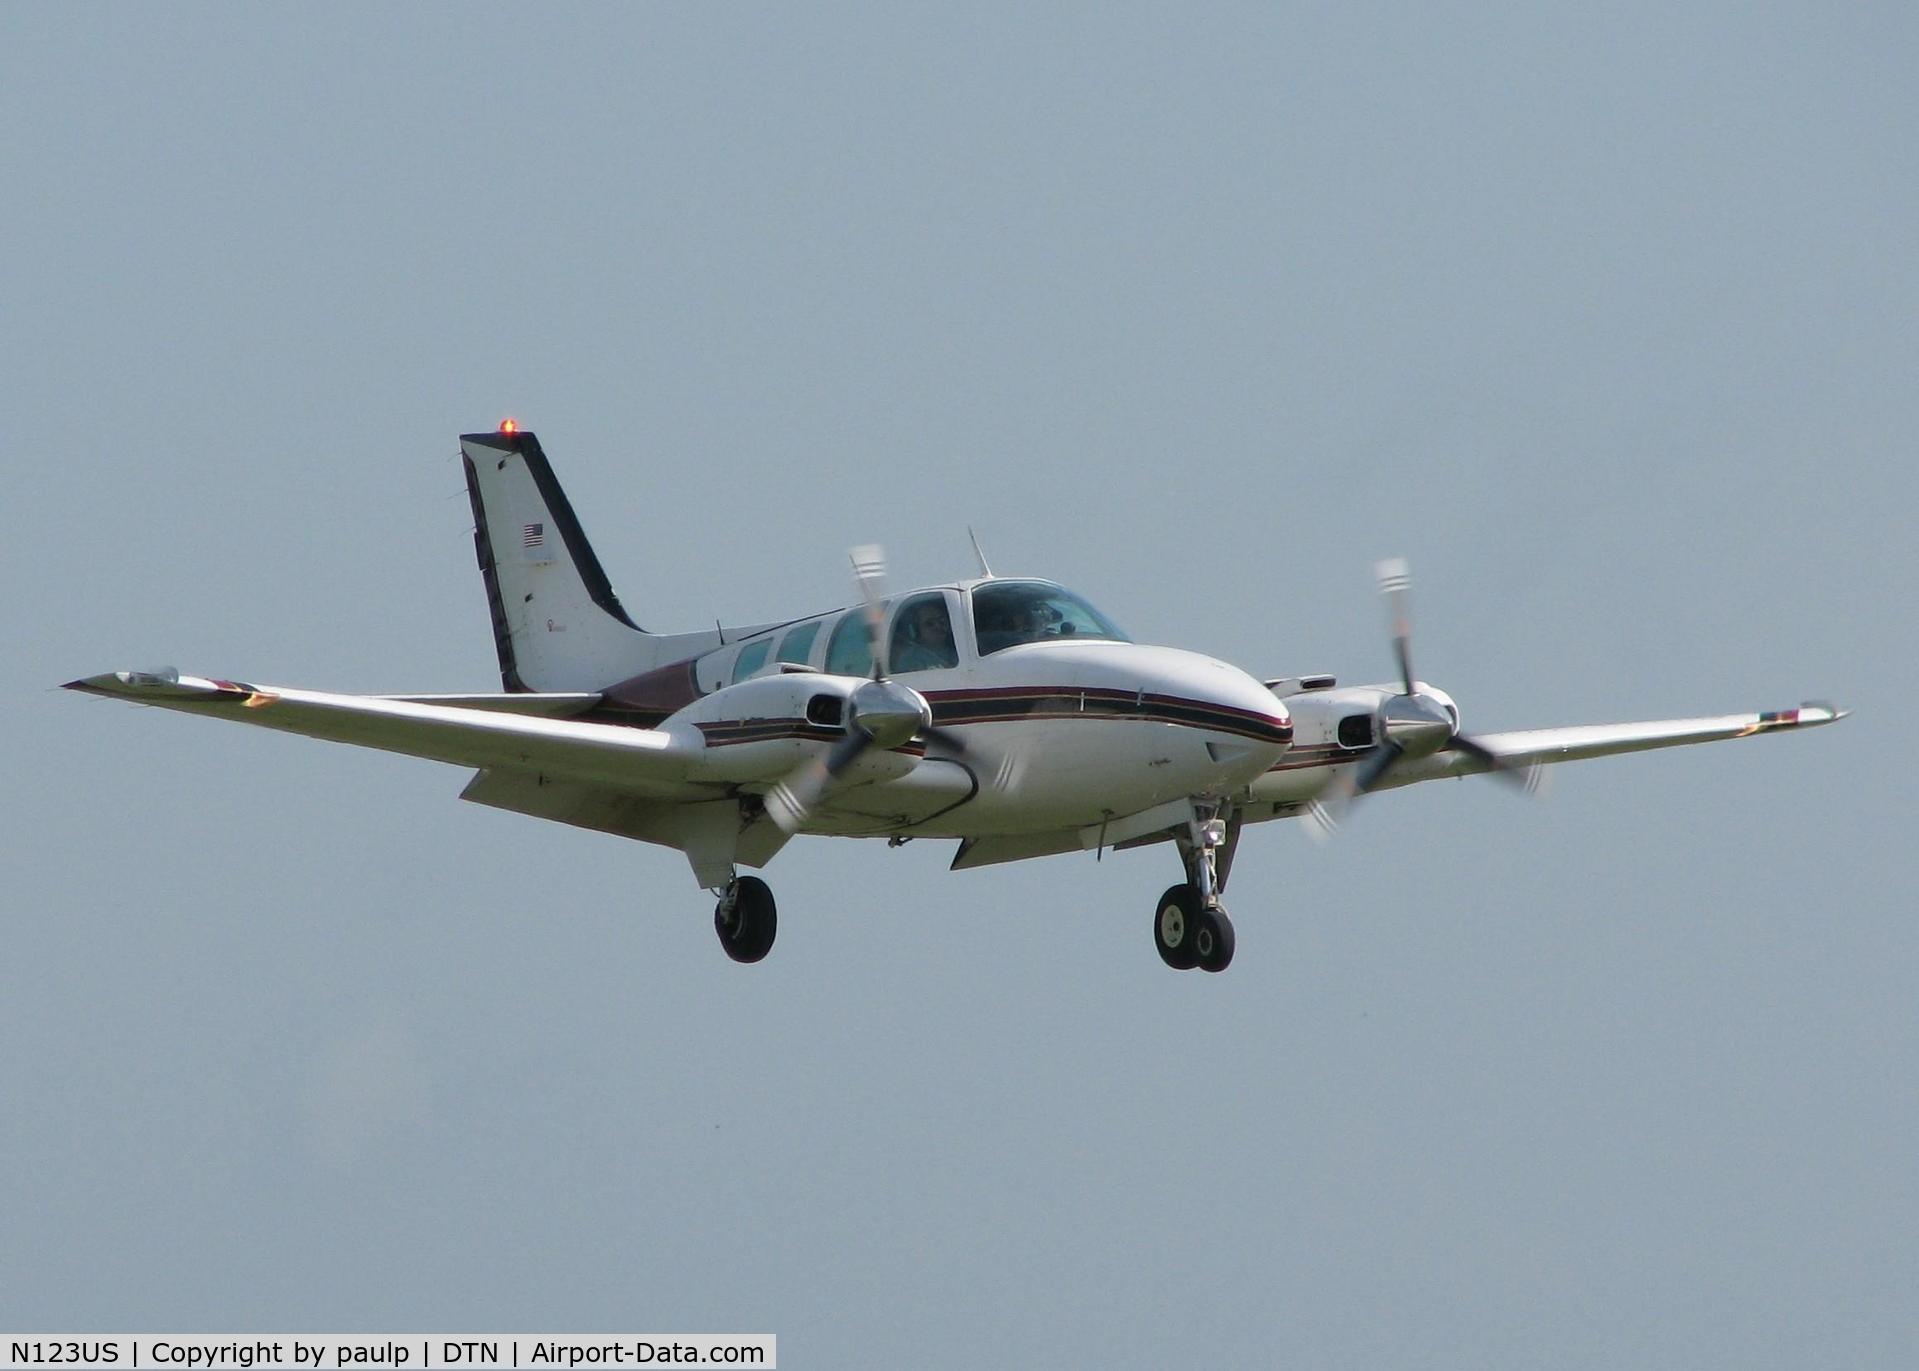 N123US, 1982 Beech 58 Baron C/N TH-1335, Landing on 14 at the Shreveport Downtown airport.